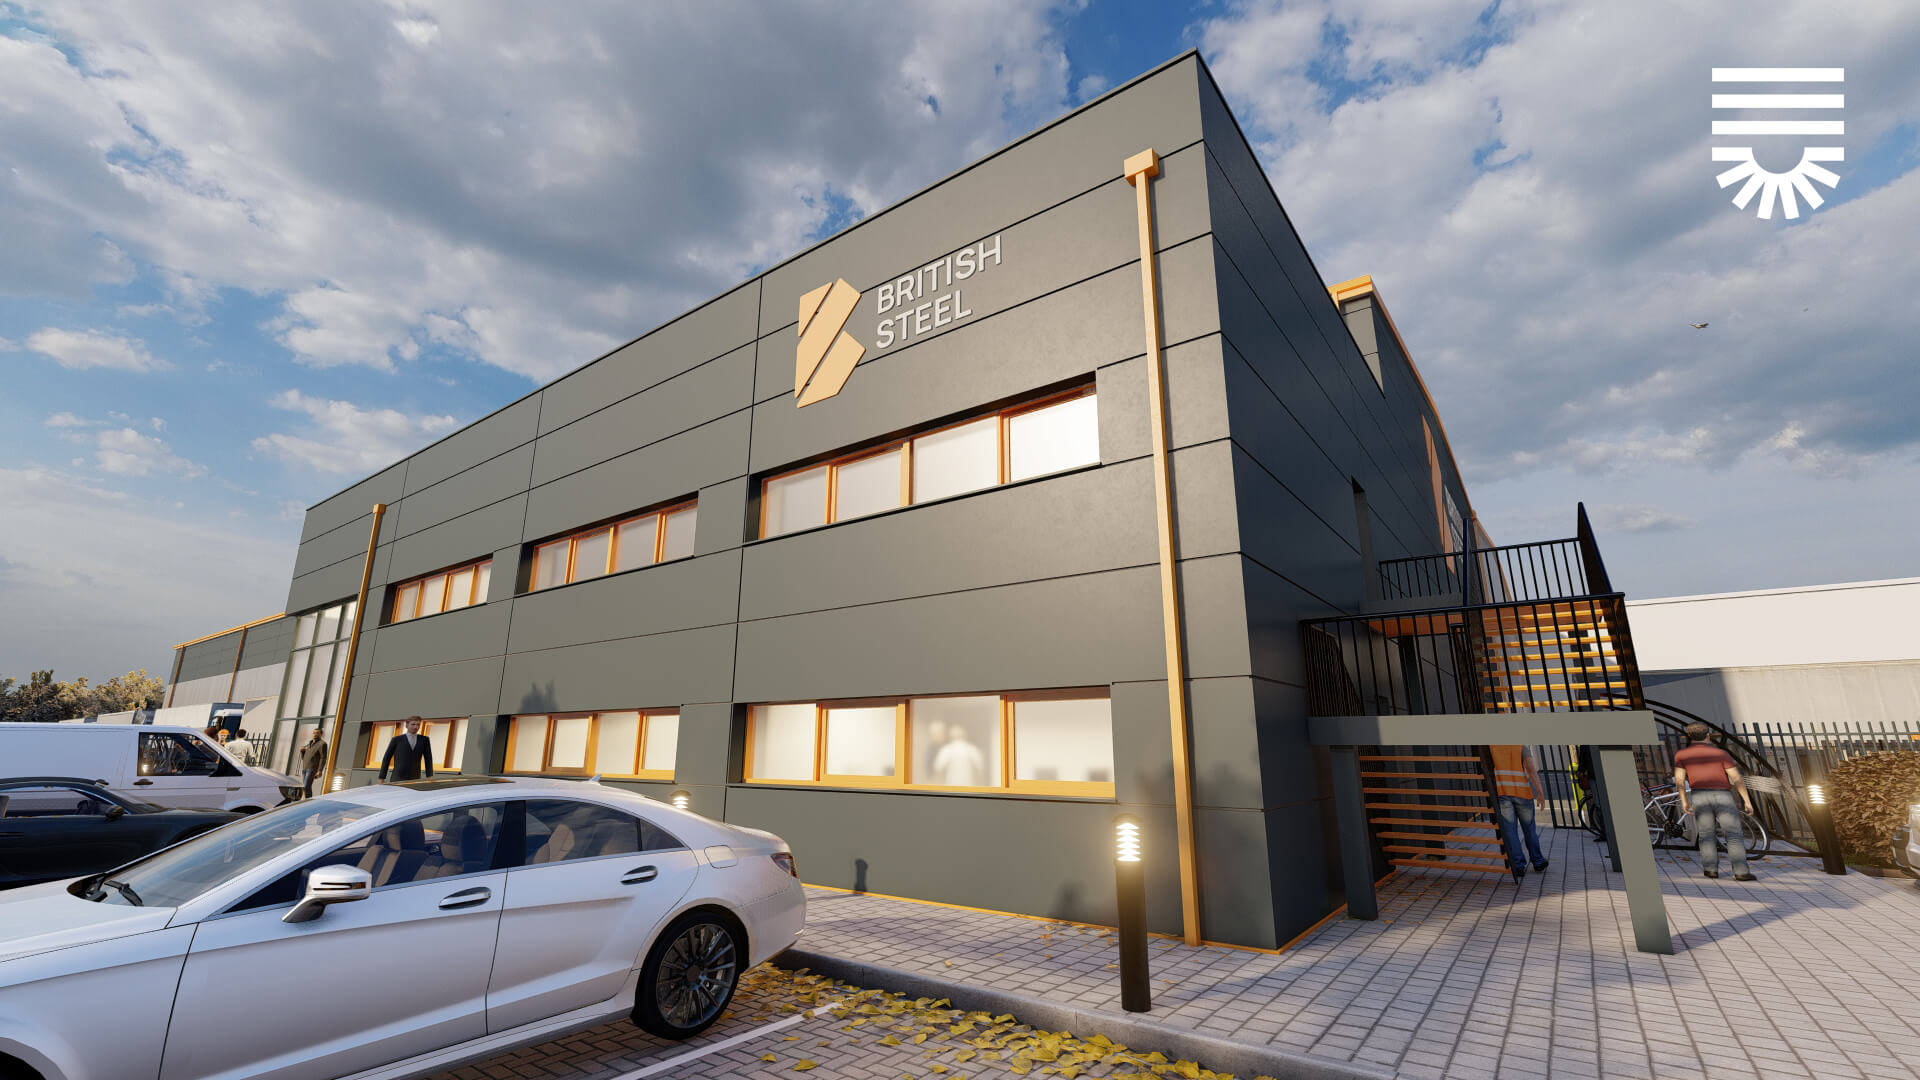 British Steel £26m Special Profiles Development wins Planning Approval